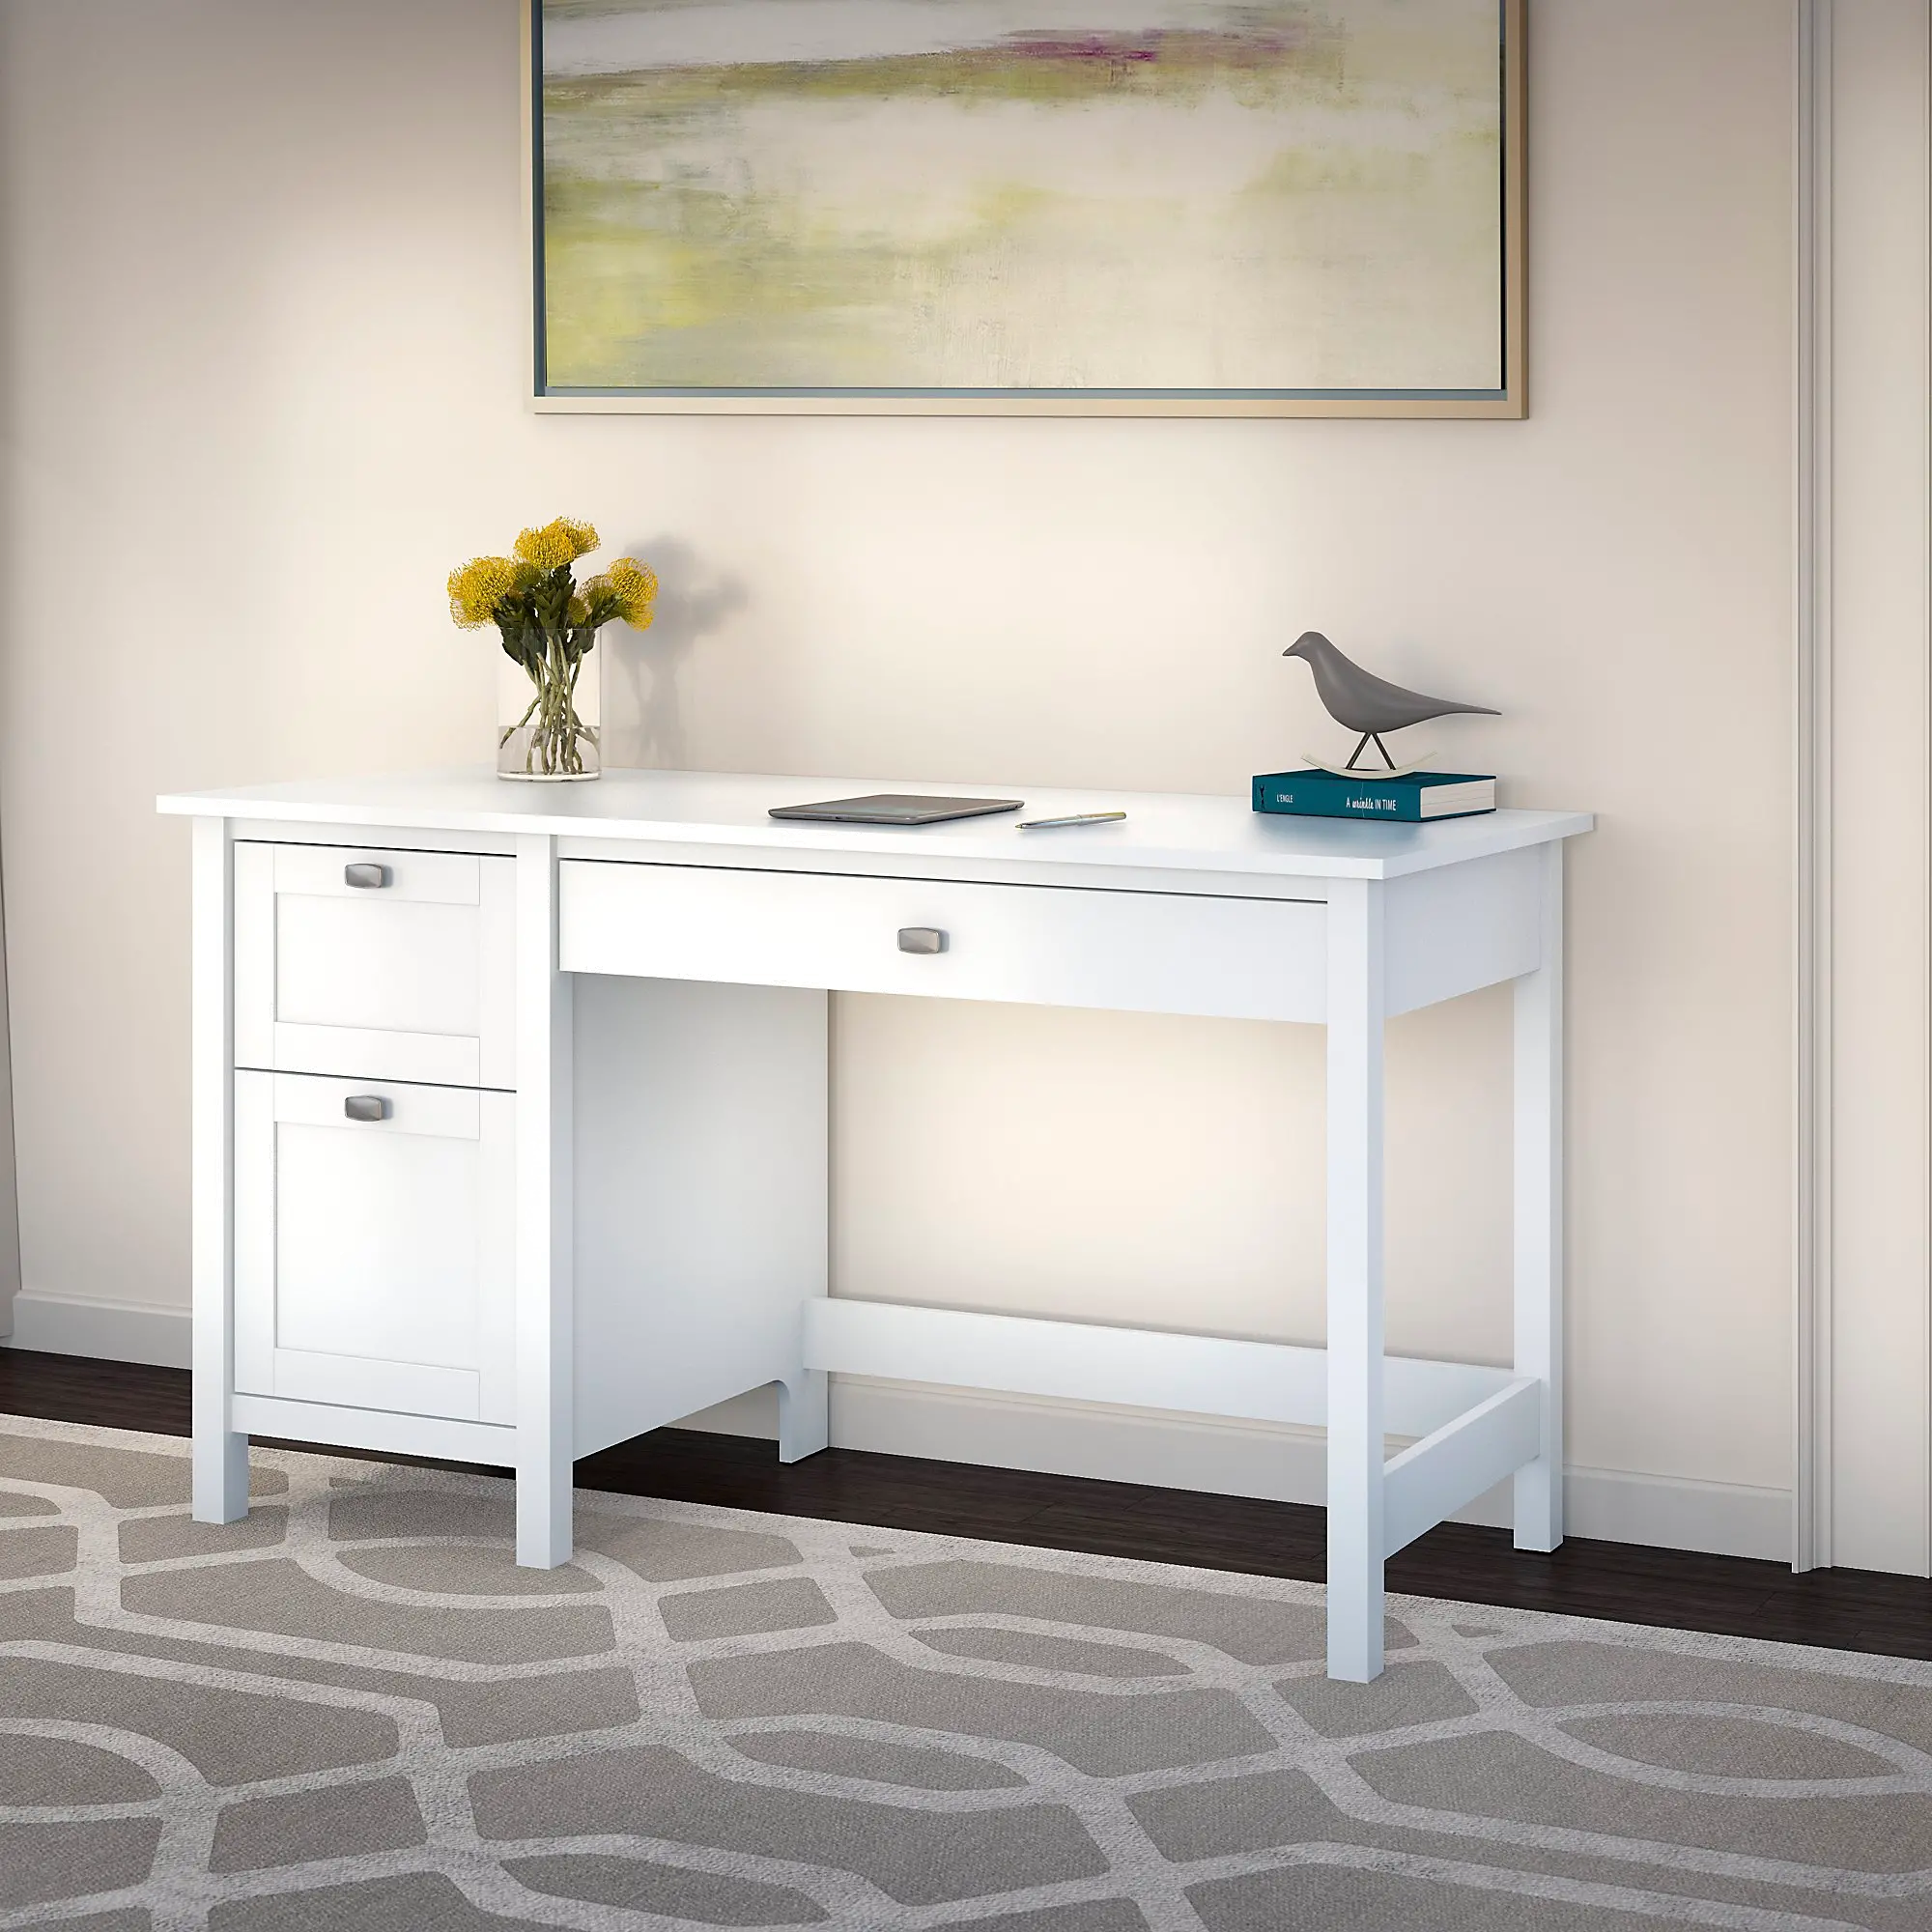 BDD254WH-03 Broadview Pure White Computer Desk with 2 Drawer P sku BDD254WH-03